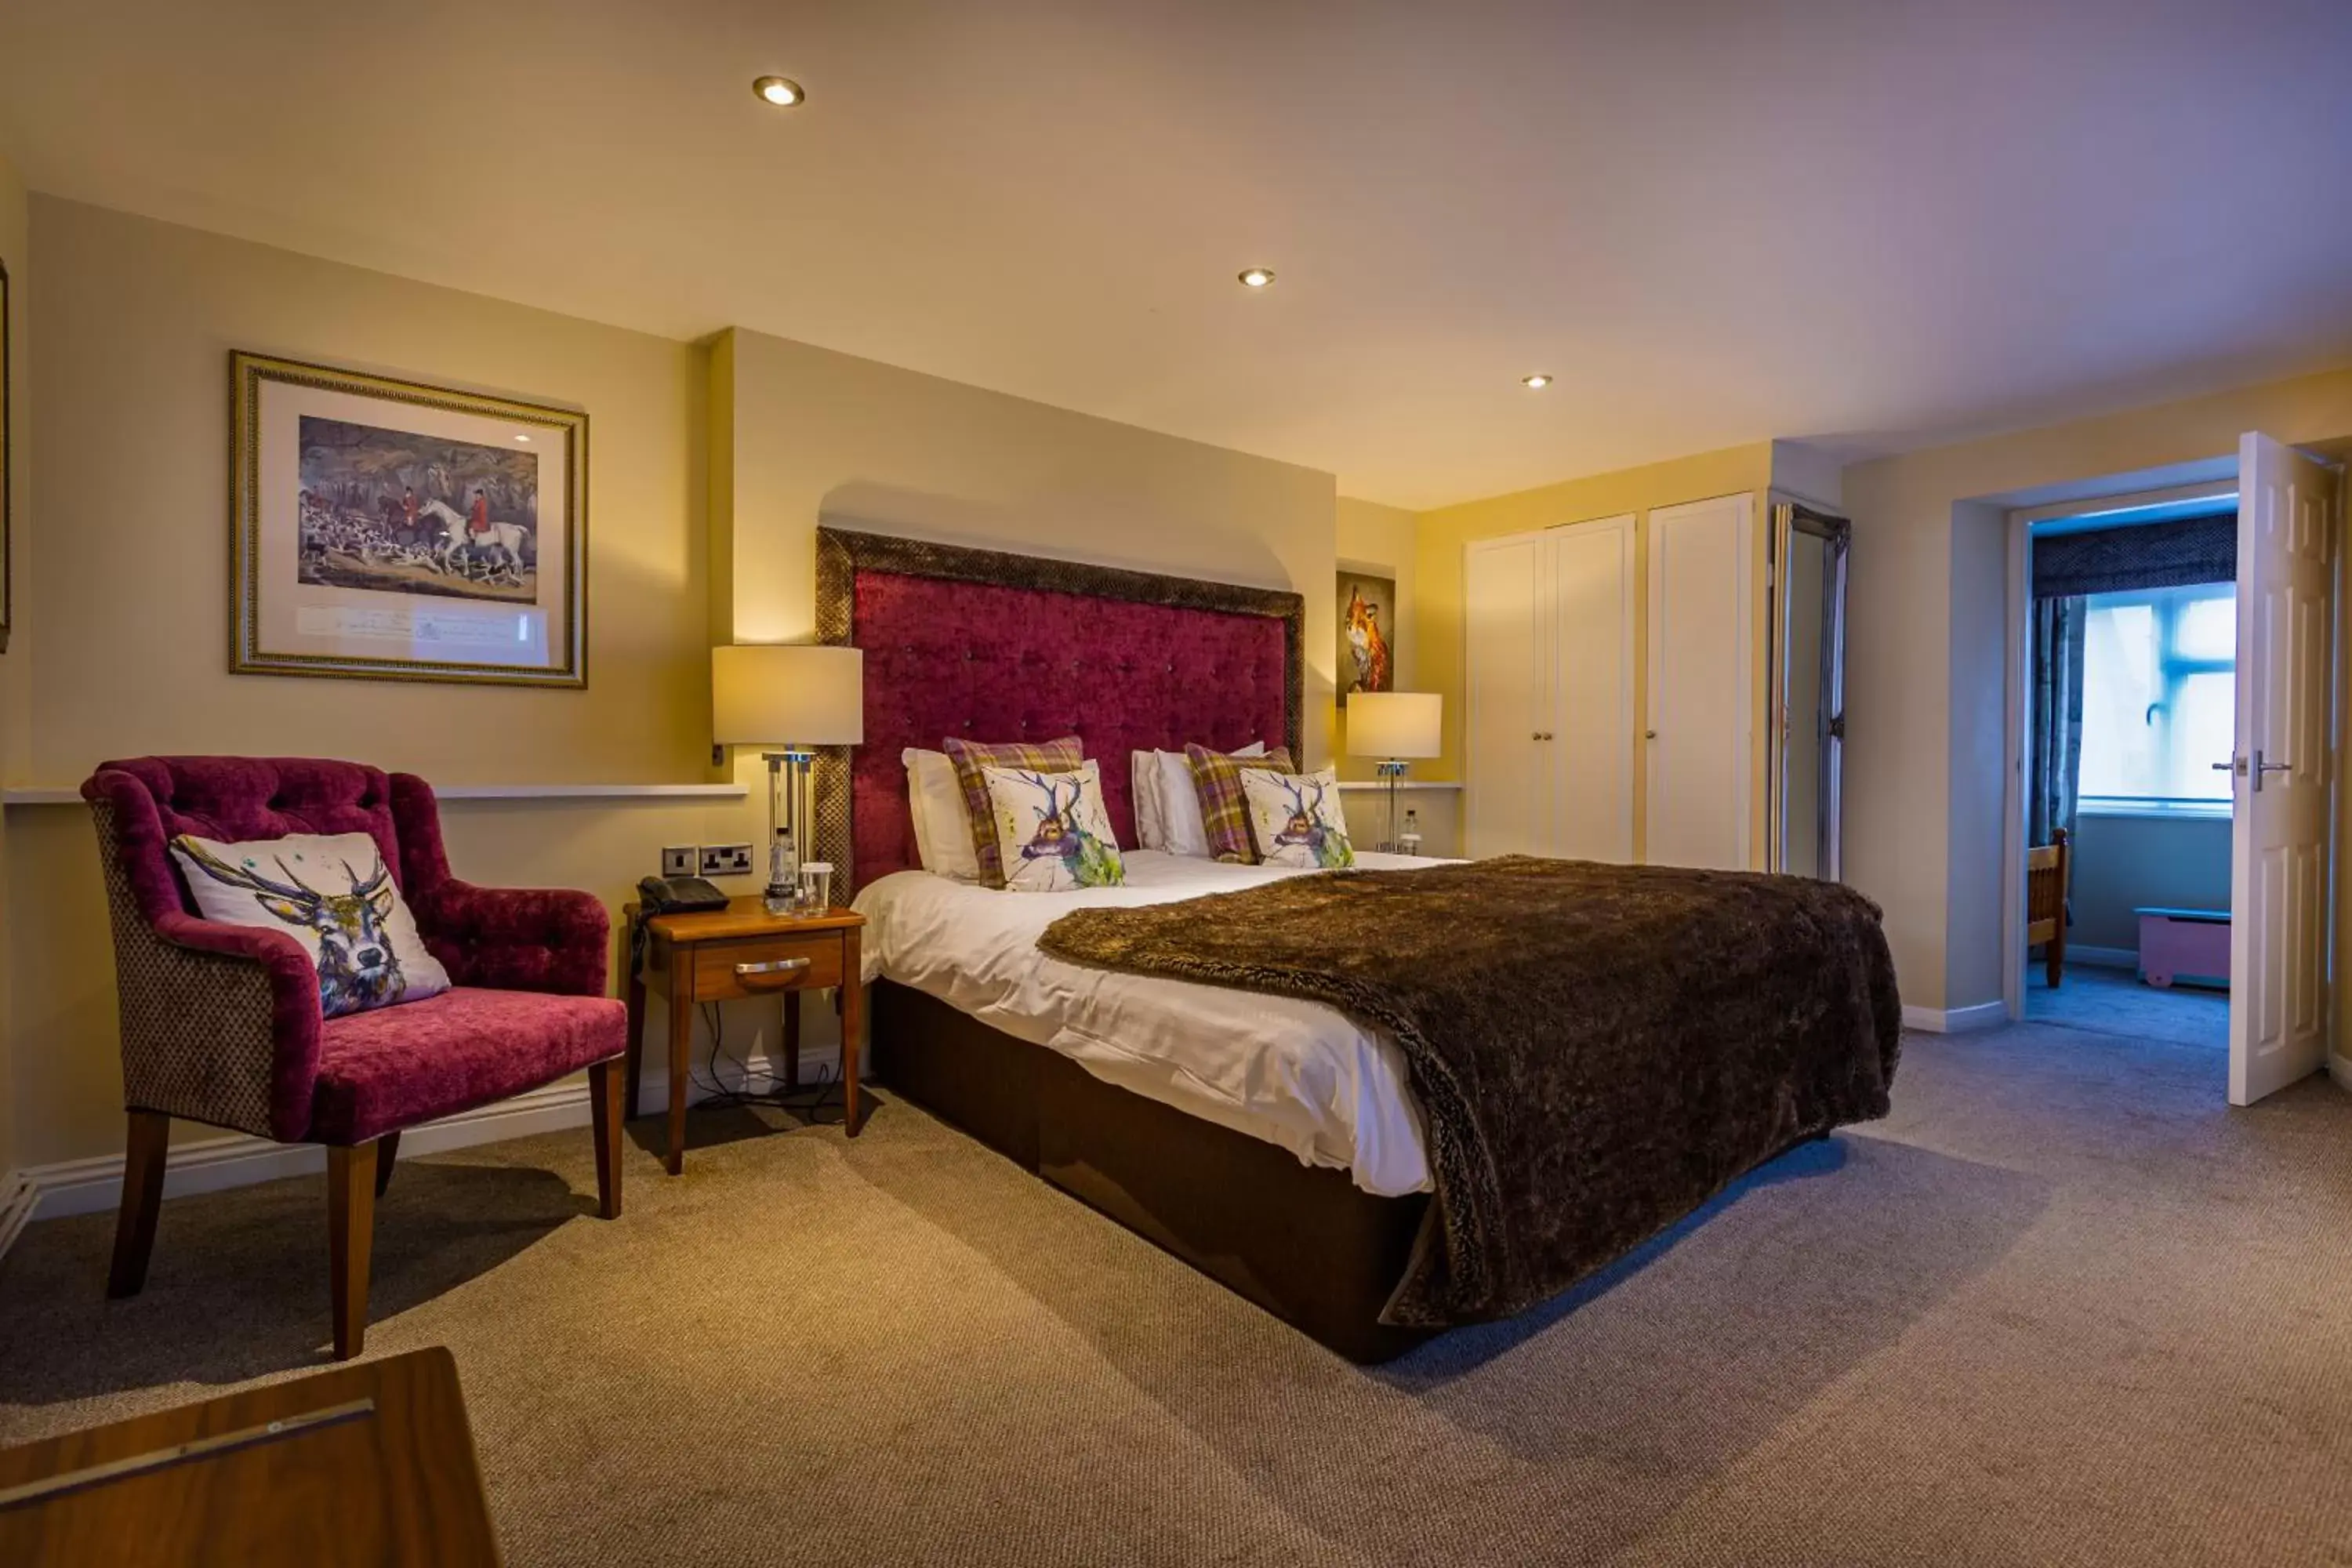 Bedroom in The Feathers Hotel, Helmsley, North Yorkshire